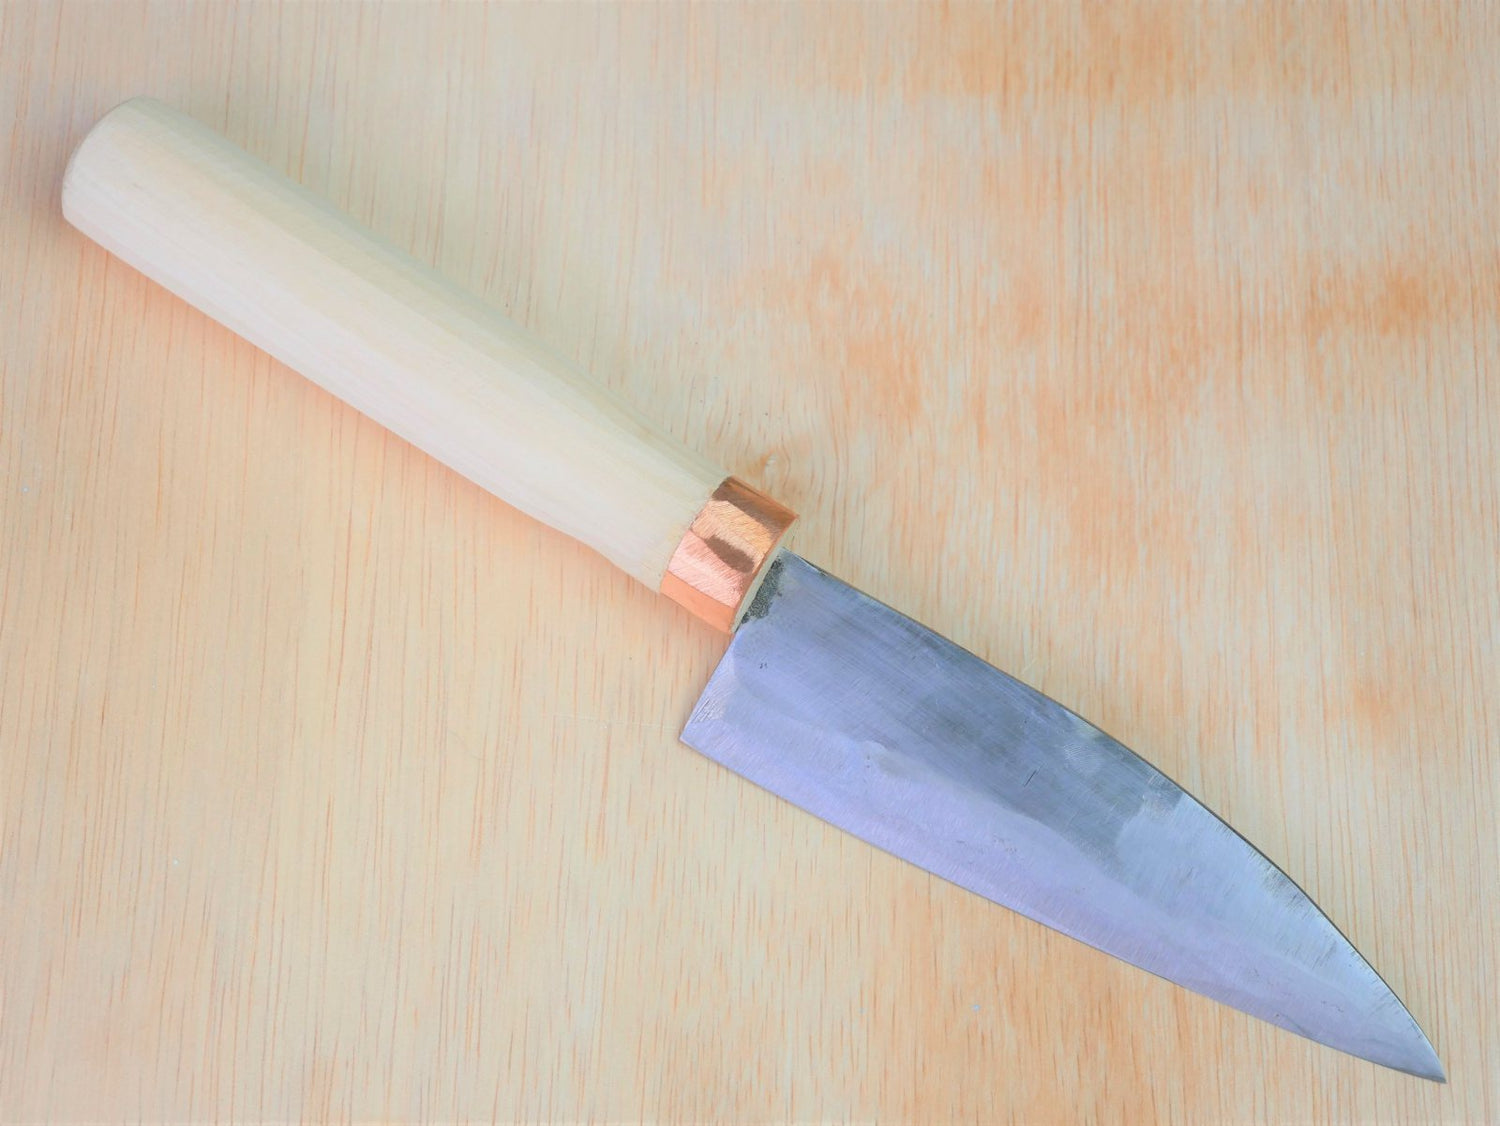 130mm Shirogami No.3 Santoku forged by Tsutomu Takahashi laying on wooden background with it's cutting edge facing south